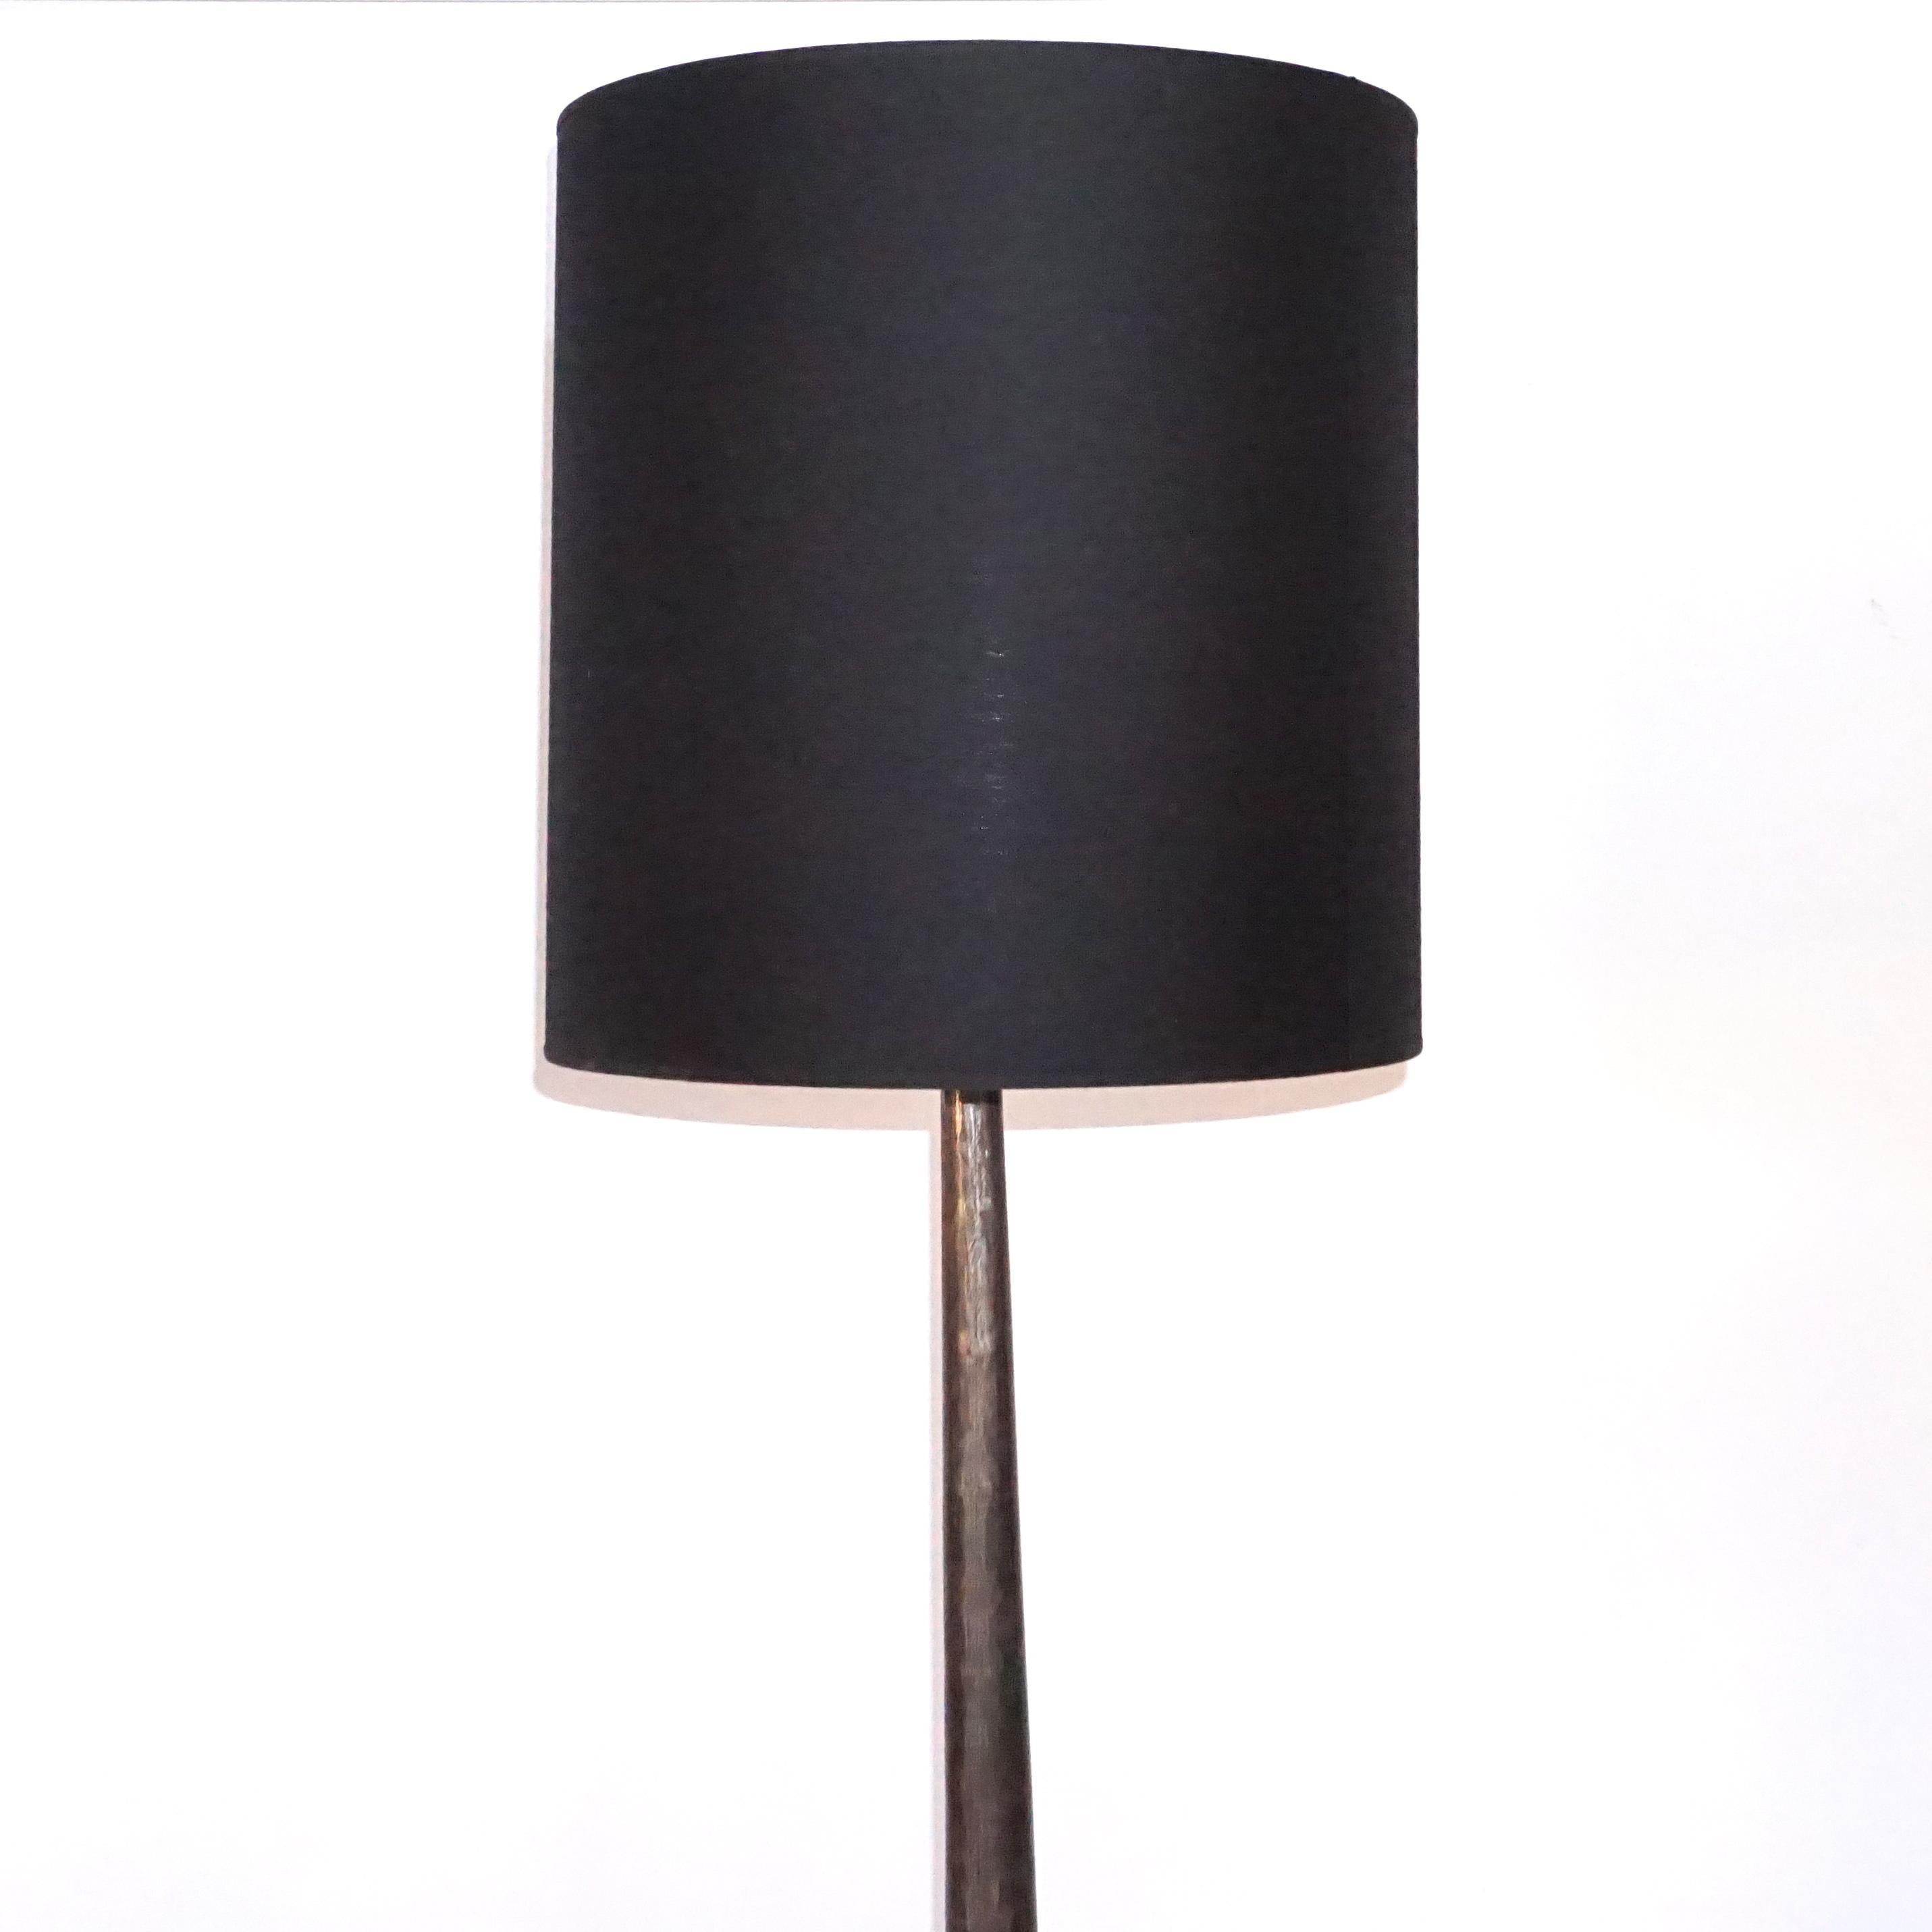 A Mid-Century modern Italian vintage floor lamp made of metal and brass, standing on three brass legs, in a good condition. Wear consistent with age and use. Circa 1950 – 1960, Italy.

Base 6″ H x 13″ W x 13″ D

Lampshade: 16.5″ W x 16.5″ D